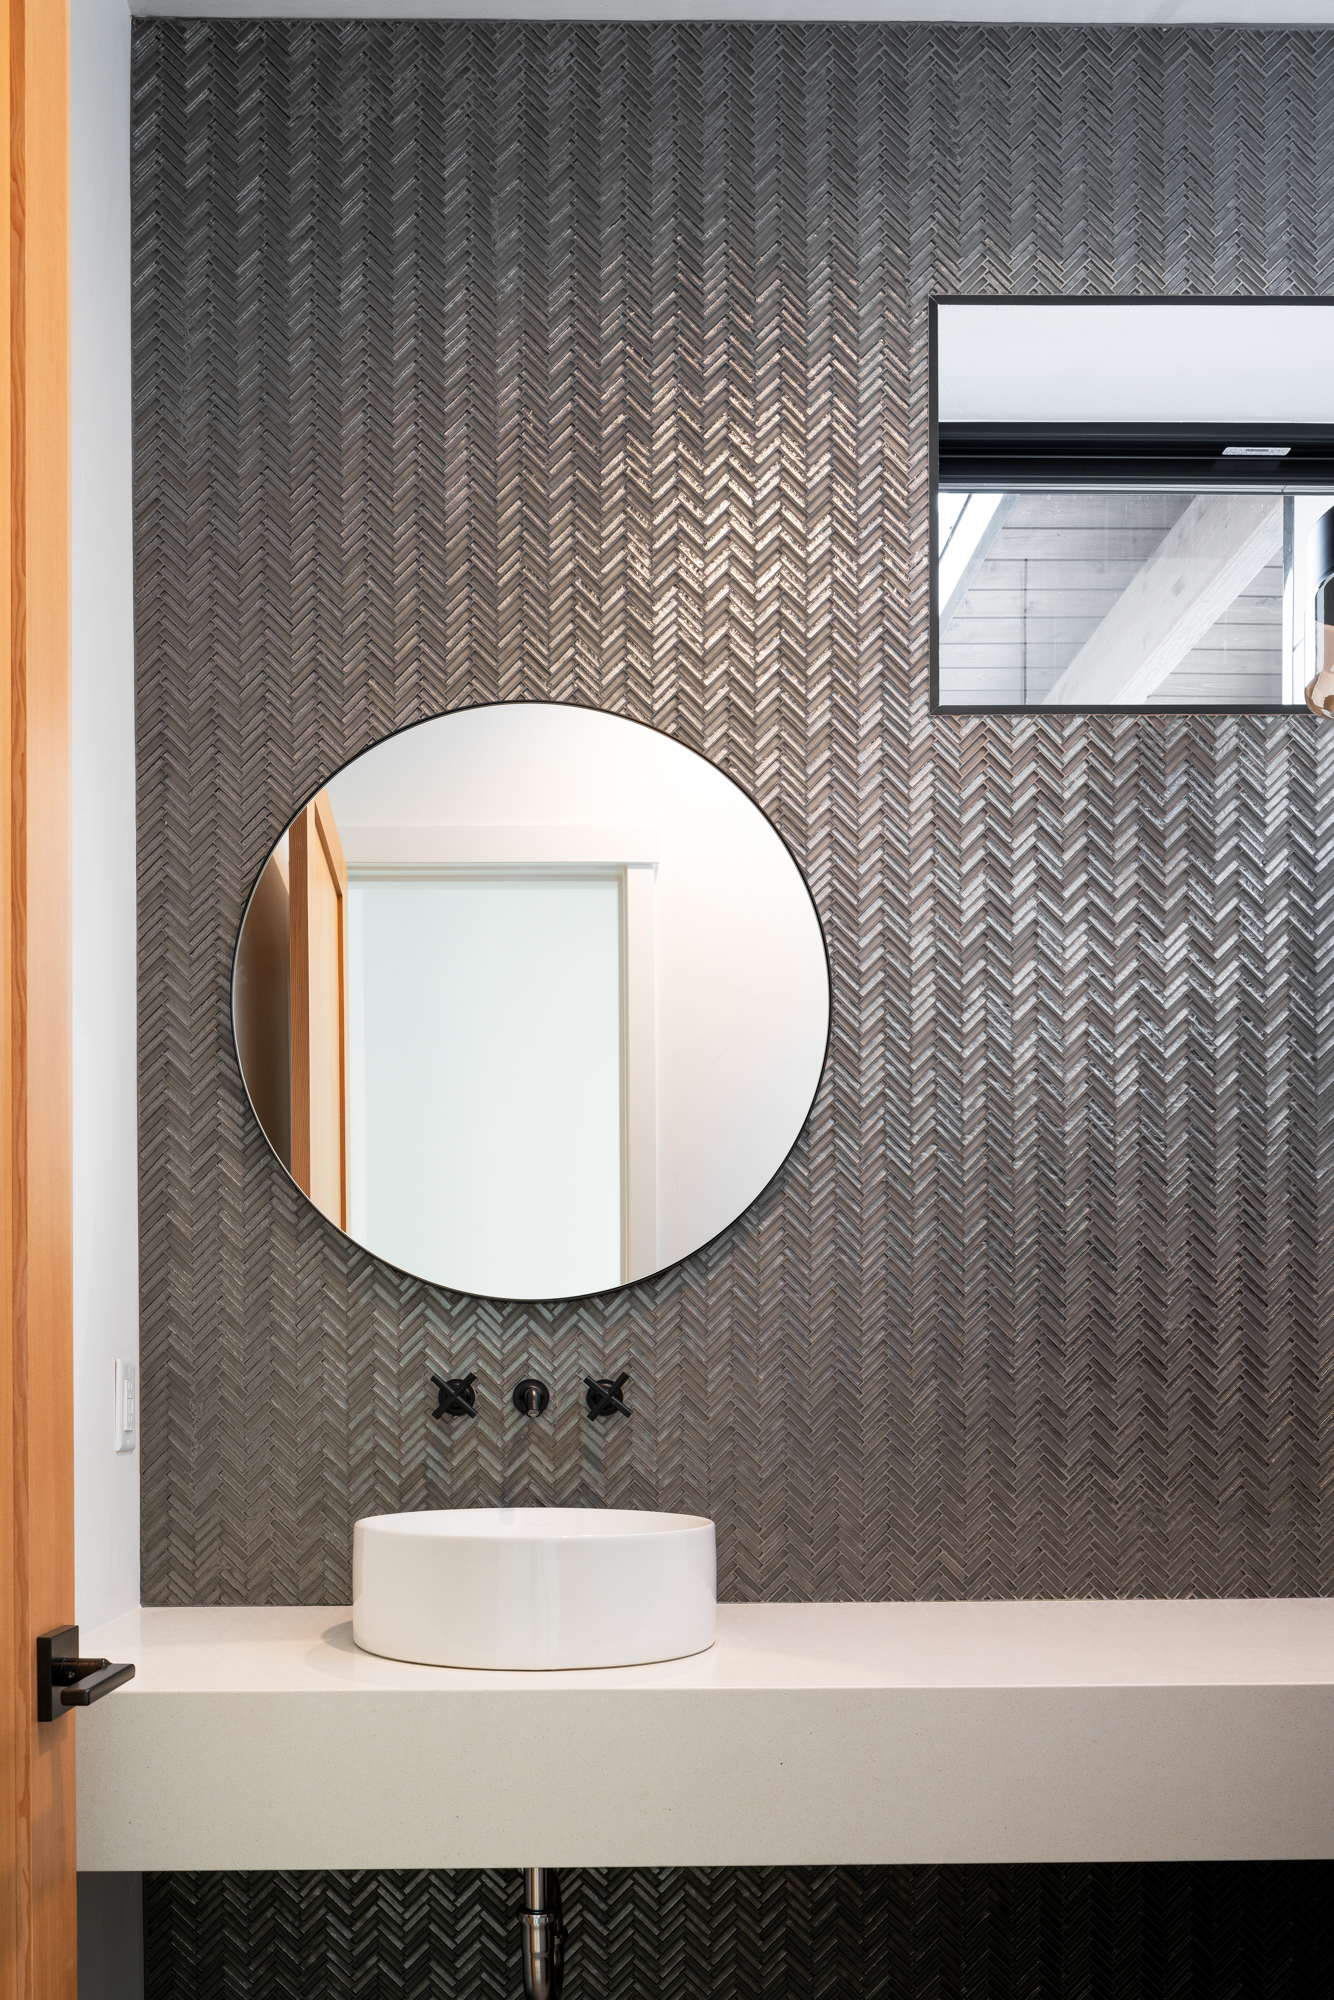 The image presents a modern bathroom vanity area, characterized by the following elements:

Mirror: A round mirror is centrally positioned against the wall, serving as a focal point.
Wall Texture: The herringbone-patterned wall provides a textured backdrop, adding visual depth.
Sink: A white, rectangular basin sink sits atop a light-colored countertop, contributing to the minimalist aesthetic.
Faucet Fixtures: Sleek, wall-mounted faucet fixtures offer a contemporary touch.
Wooden Detailing: Wooden elements to the left suggest warmth within the space.
Lighting: A small window in the upper right corner introduces natural light, enhancing the room’s textures and materials.
The composition of the photograph demonstrates a well-lit, clean, and modern space, with a focus on simplicity and elegance. The technical aspects such as lighting, focus, and composition have been executed with precision to highlight the bathroom’s design features.